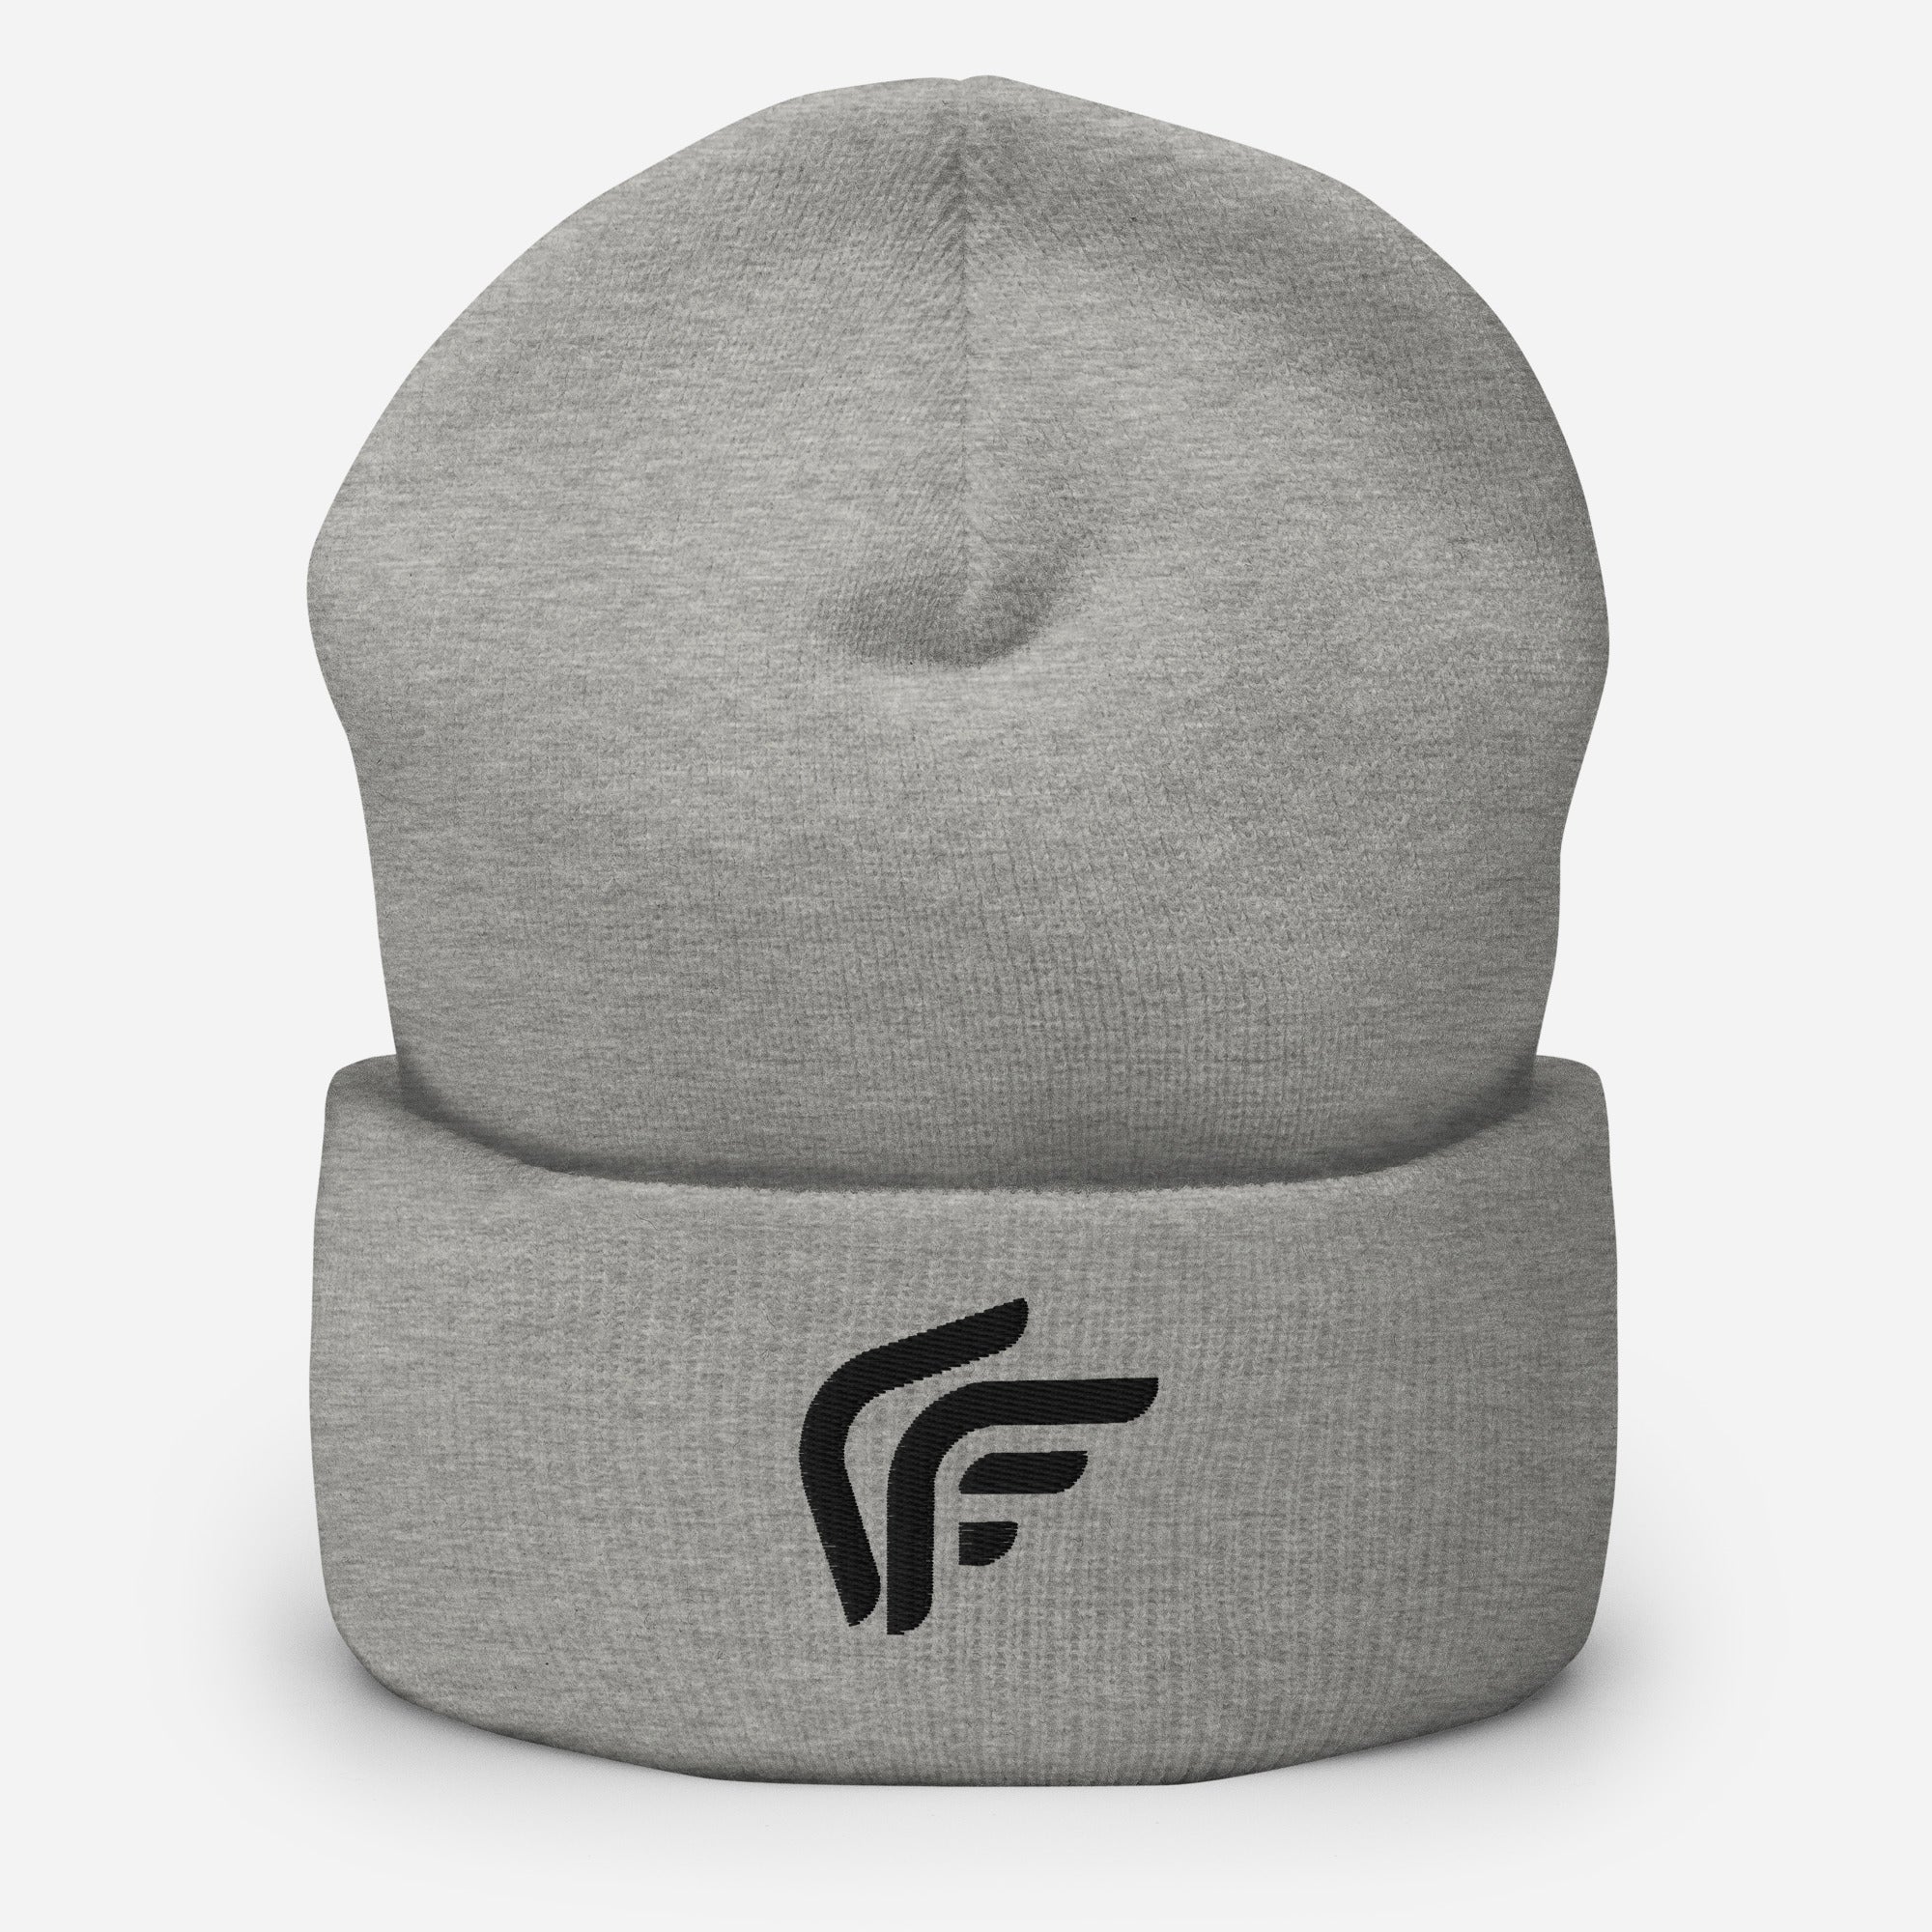 Favored By God Logo Beanie, Used By God, Used By God Clothing, Christian Apparel, Christian Hats, Christian T-Shirts, Christian Clothing, God Shirts, Christian Sweatshirts, God Clothing, Jesus Hoodie, Jesus Clothes, God Is Dope, Art Of Homage, Red Letter Clothing, Elevated Faith, Active Faith Sports, Beacon Threads, God The Father Apparel